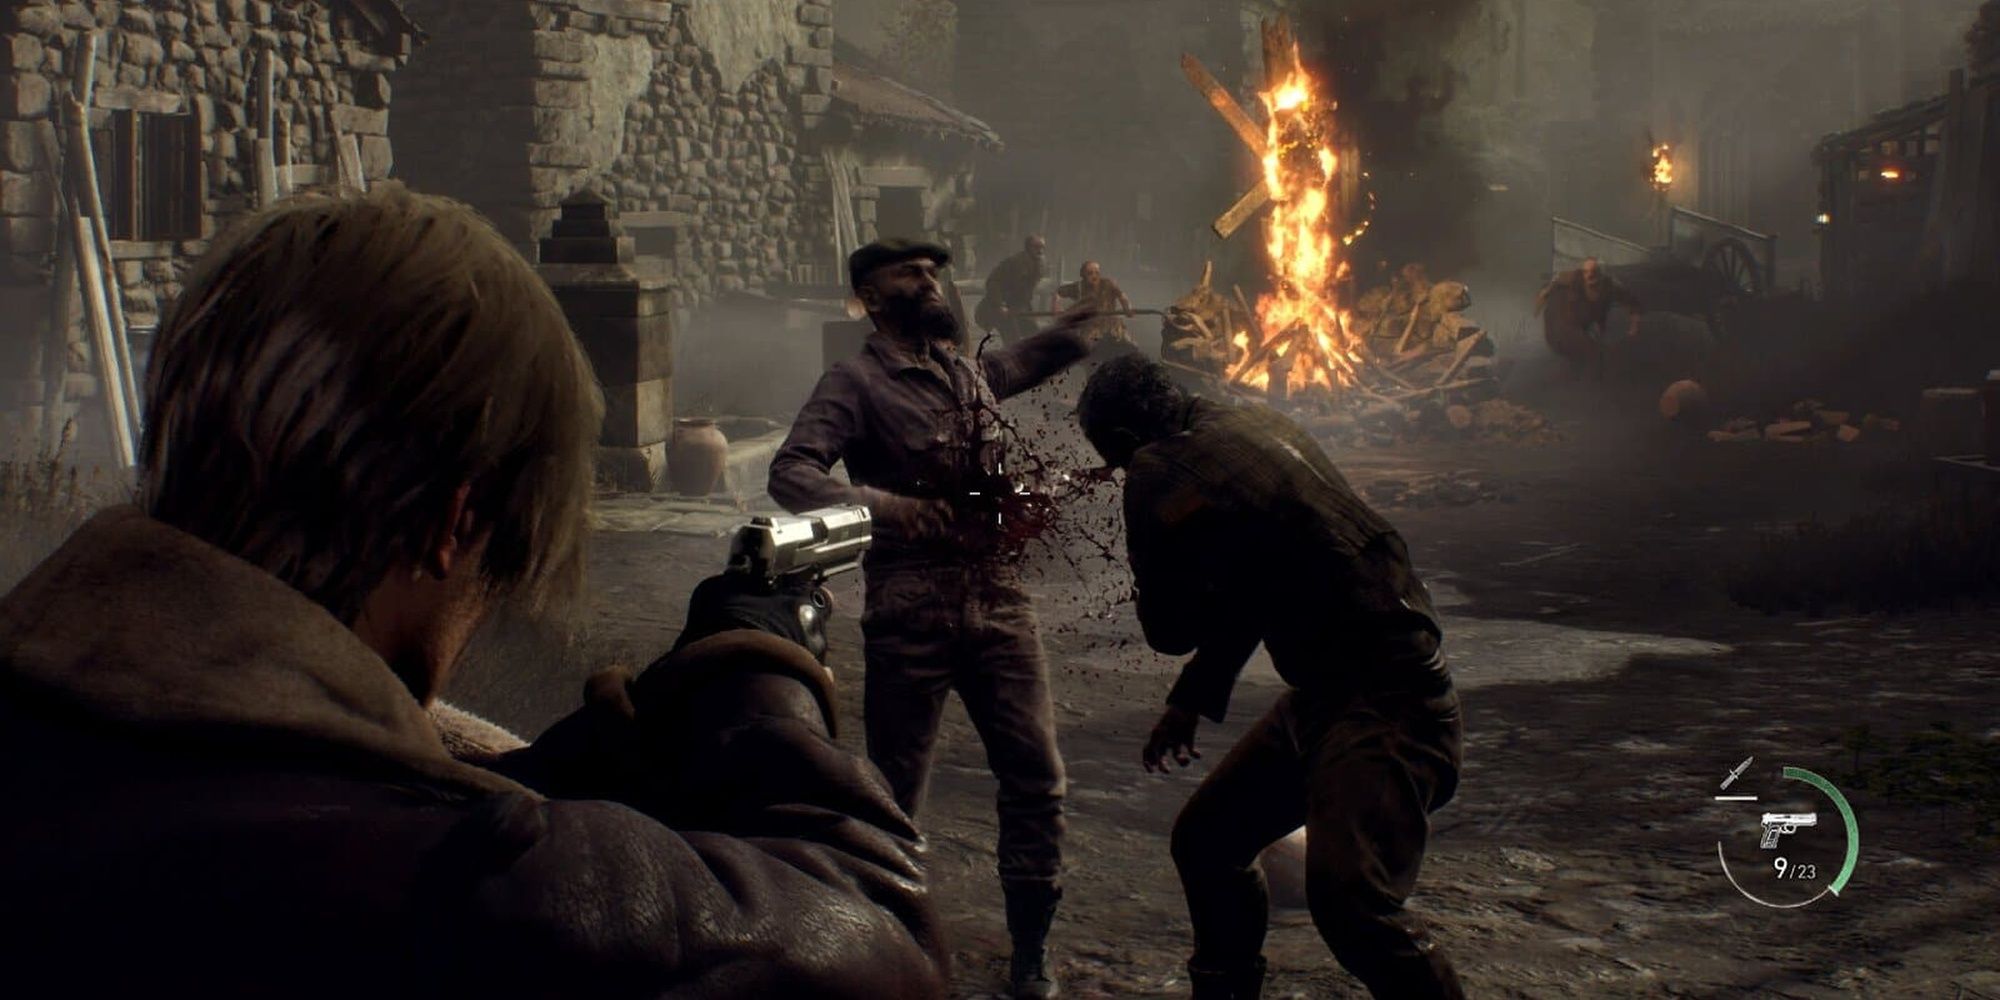 Resident Evil 4 - Remake: Leon Kennedy Being Attacked By Villagers